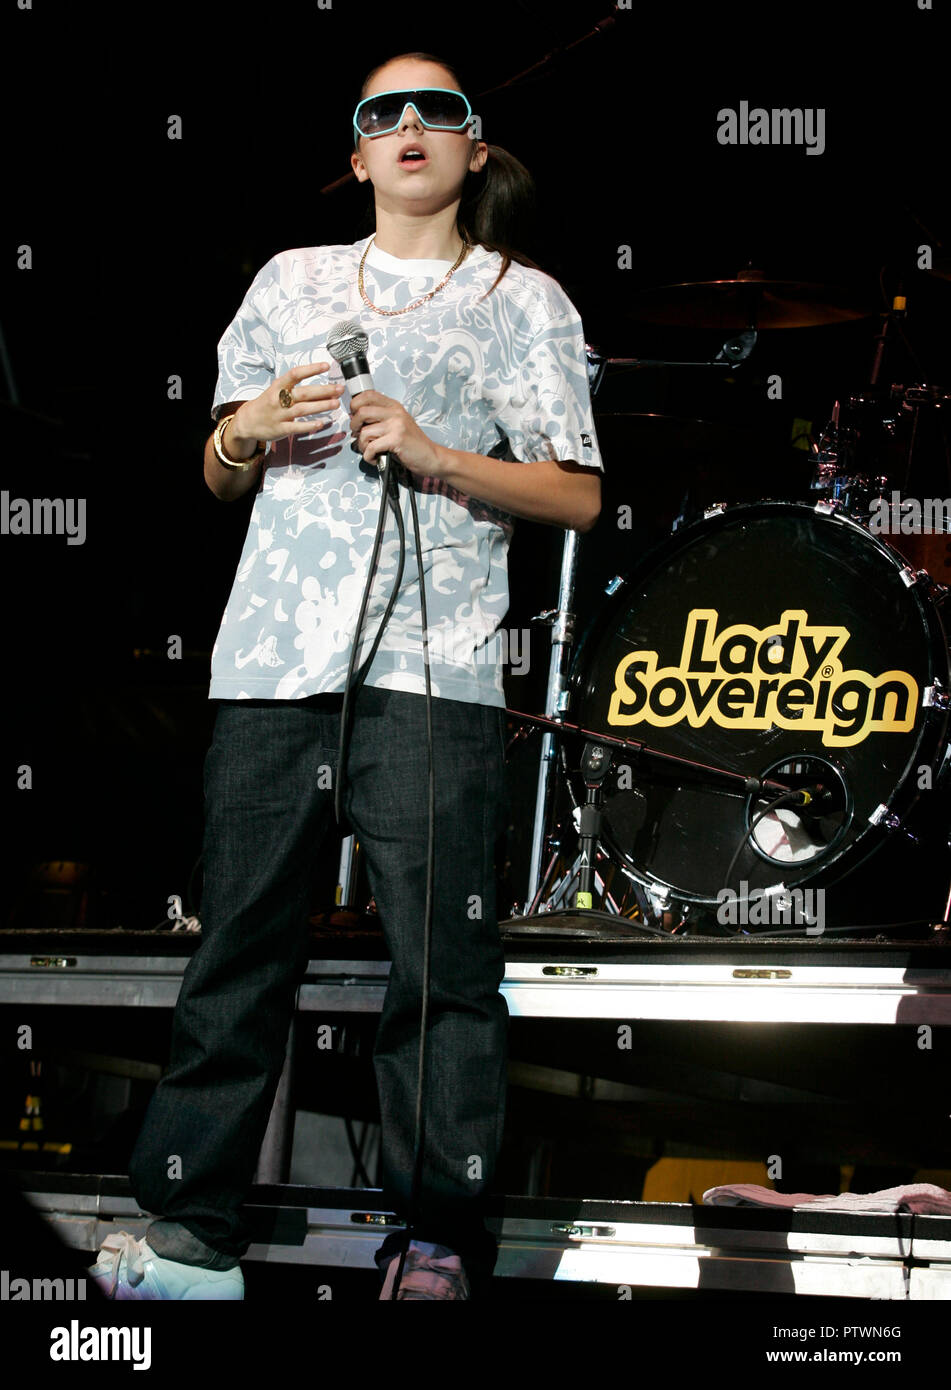 Lady Sovereign performs in concert at the Sound Advice Amphitheatre in West Palm Beach, Florida on May 9, 2007. Stock Photo